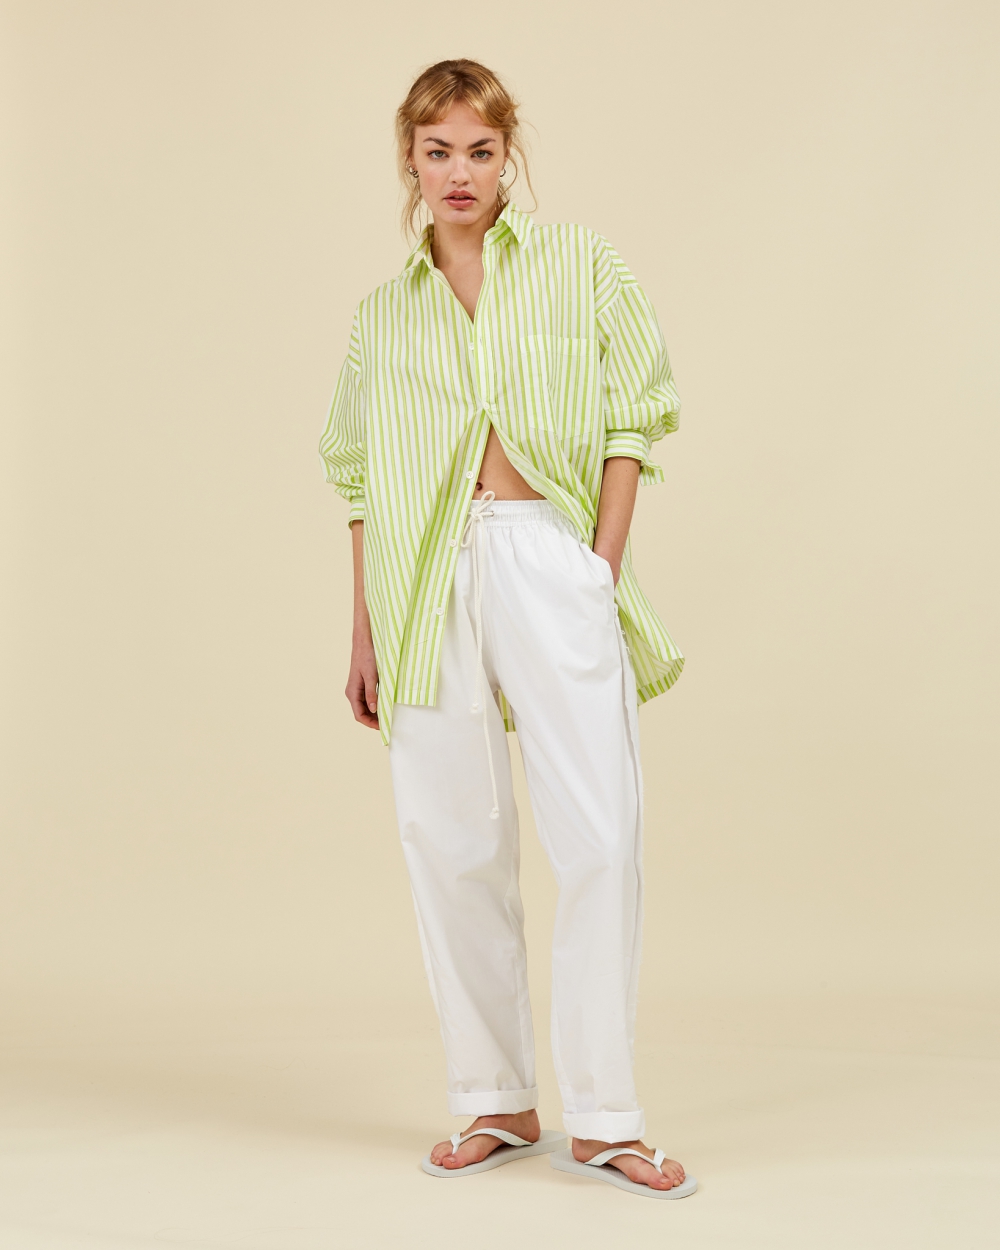 https://www.seamehappy.be/wp-content/uploads/2023/01/Sea-Me-Happy-Viktor-shirt-striped-lime-front.jpg